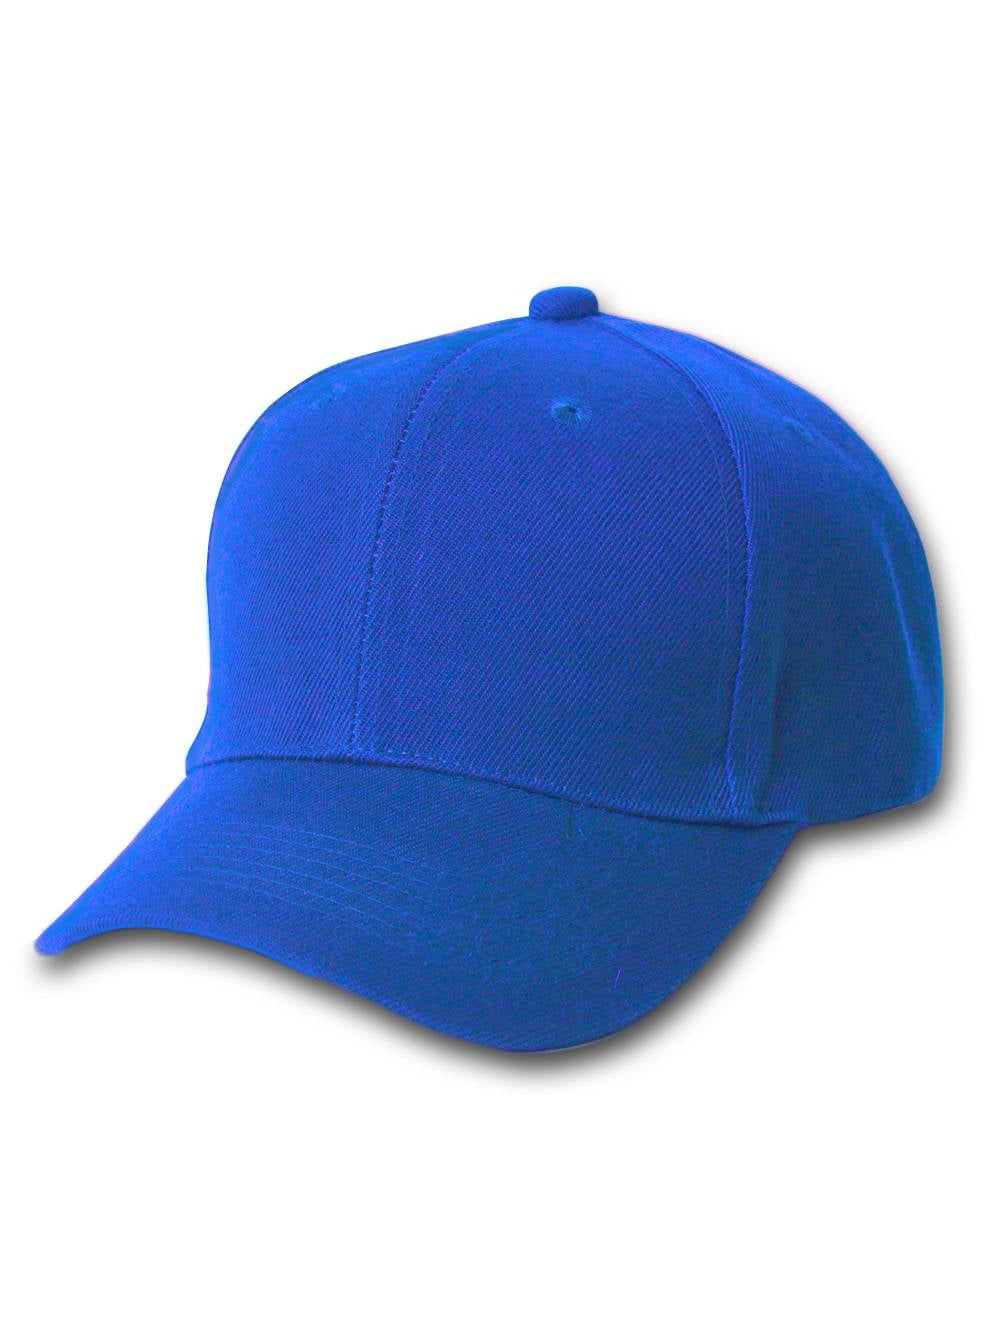 Zipper-G Caps Combo Pack of 3 Royal Blue White Navy Blue Cotton Baseball  Cap for Men Women Free Size with Adjustable Strap